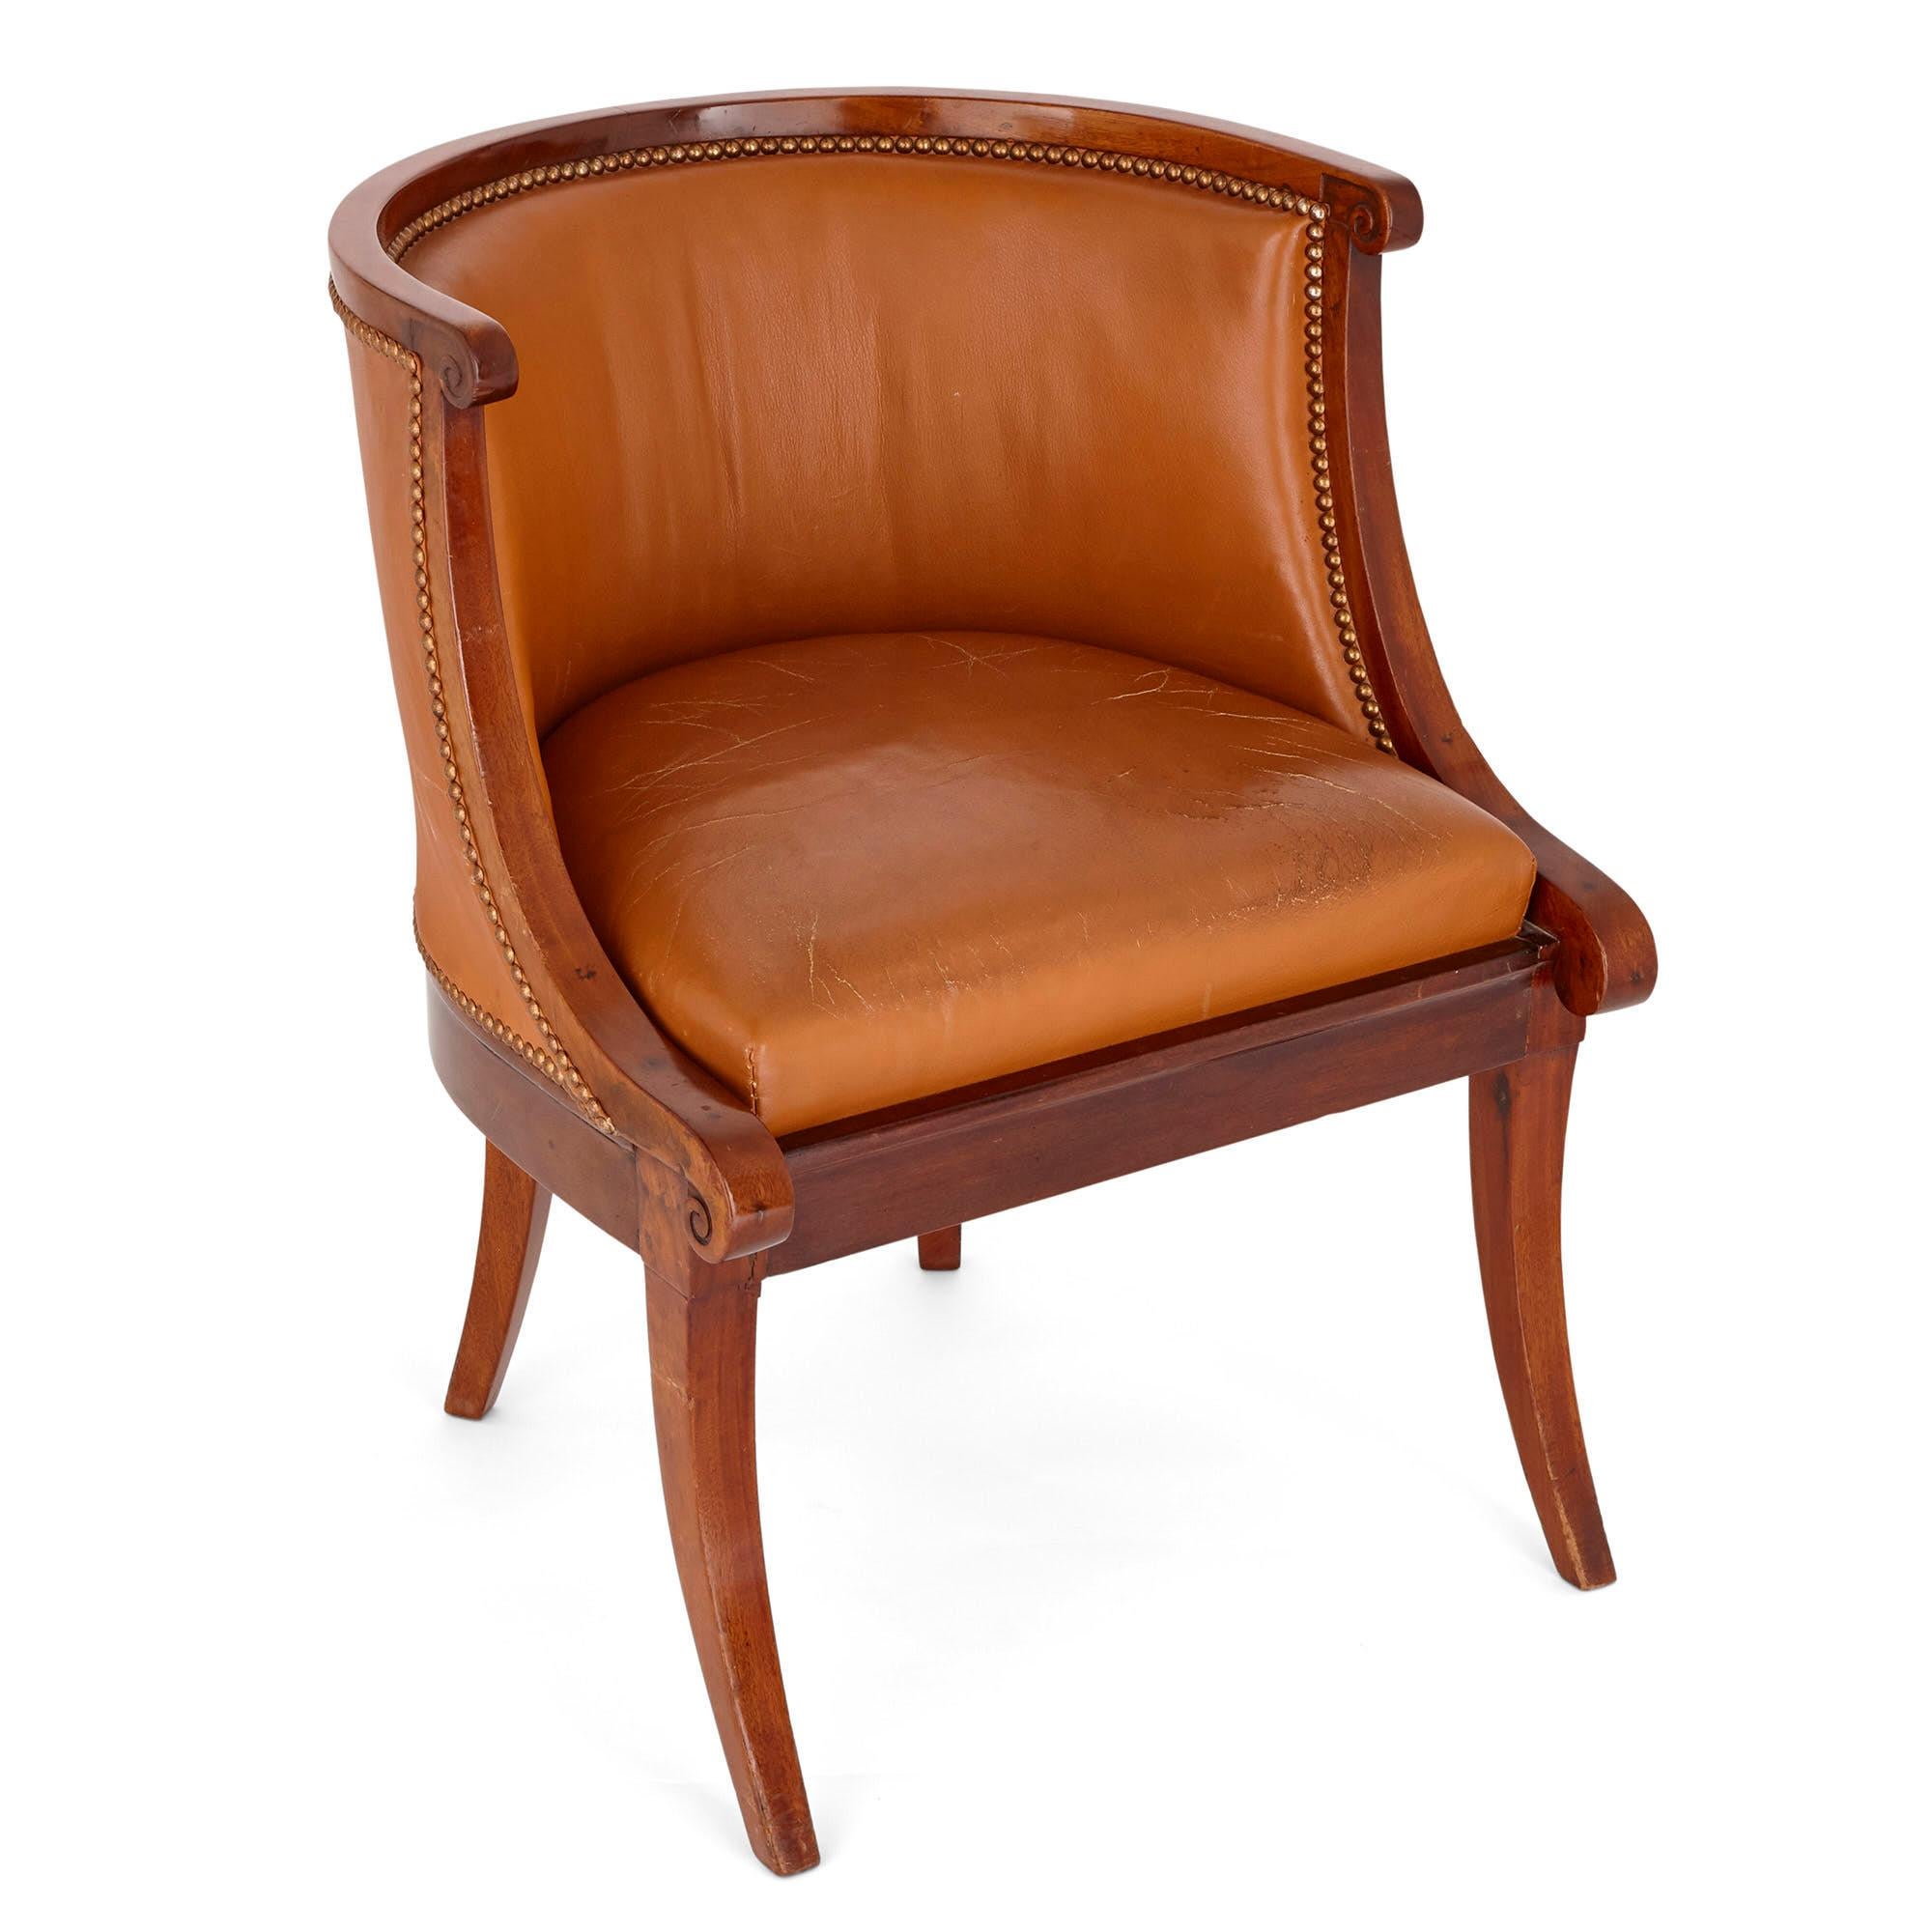 Louis XVI Neoclassical 18th Century French Leather Chair